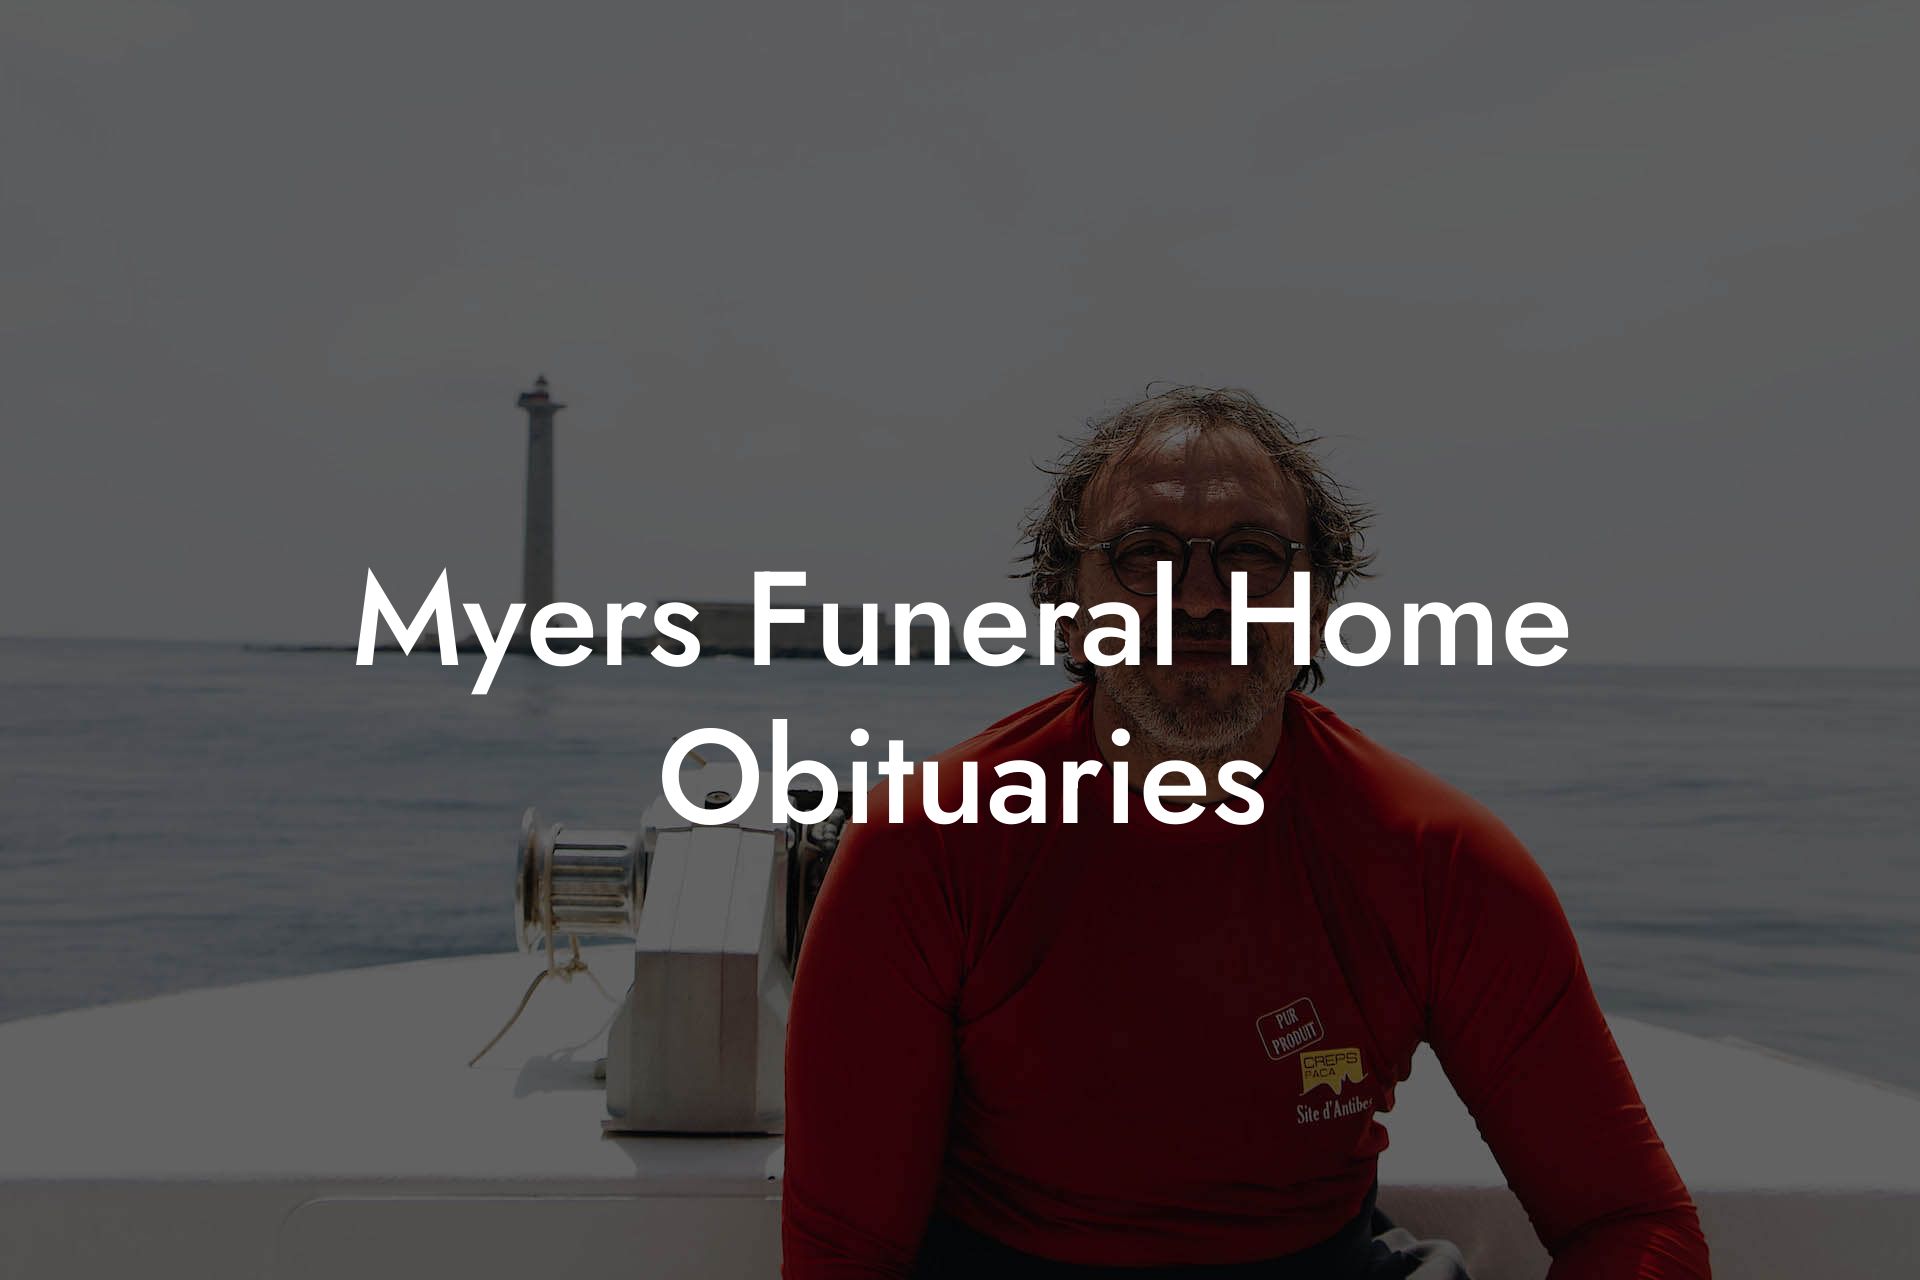 Myers Funeral Home Obituaries